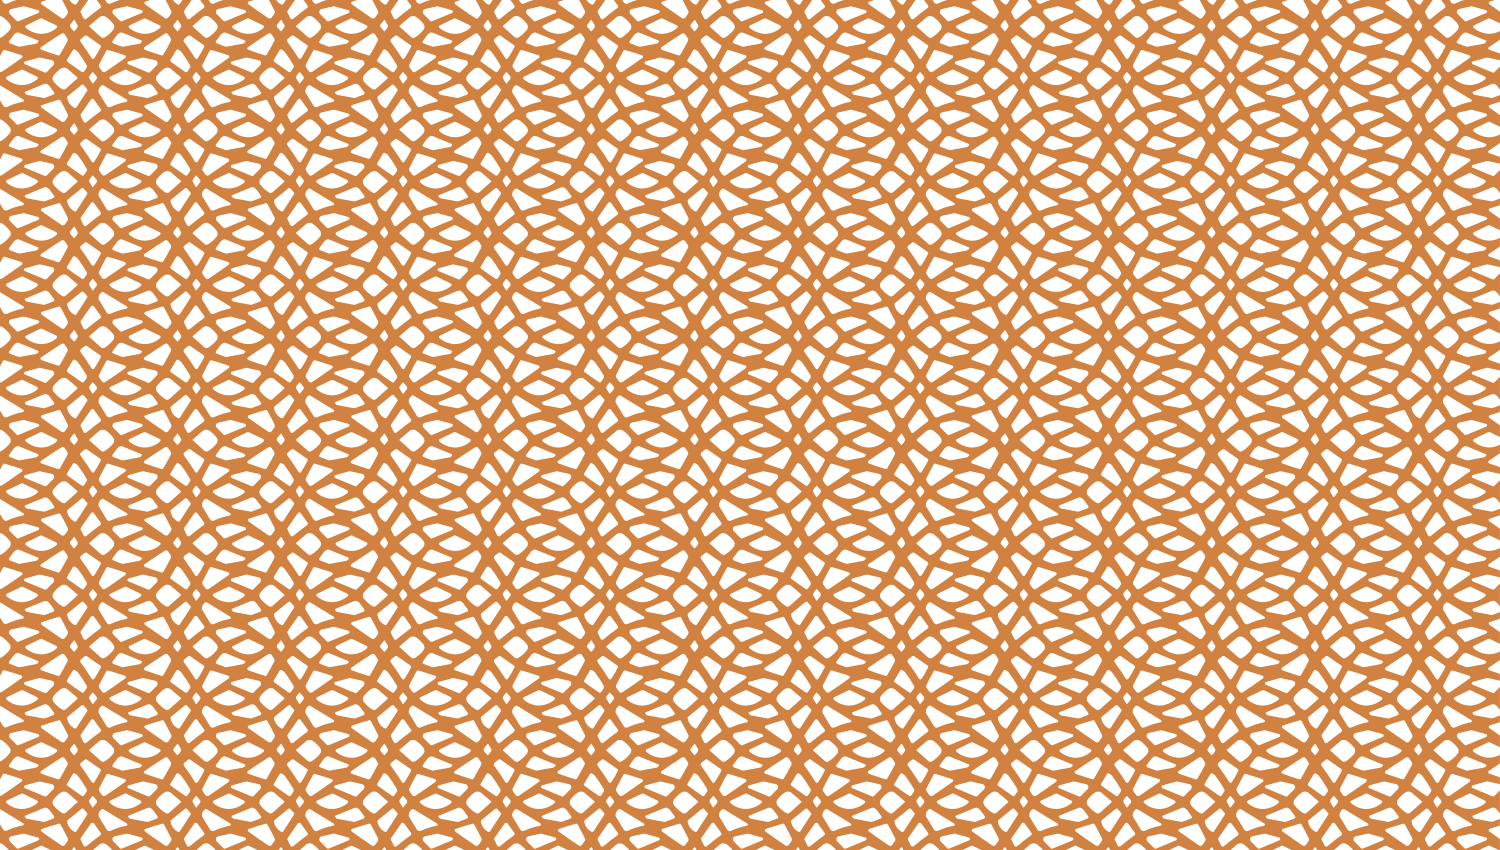 Parasoleil™ Serpentine© pattern displayed with a ochre color overlay